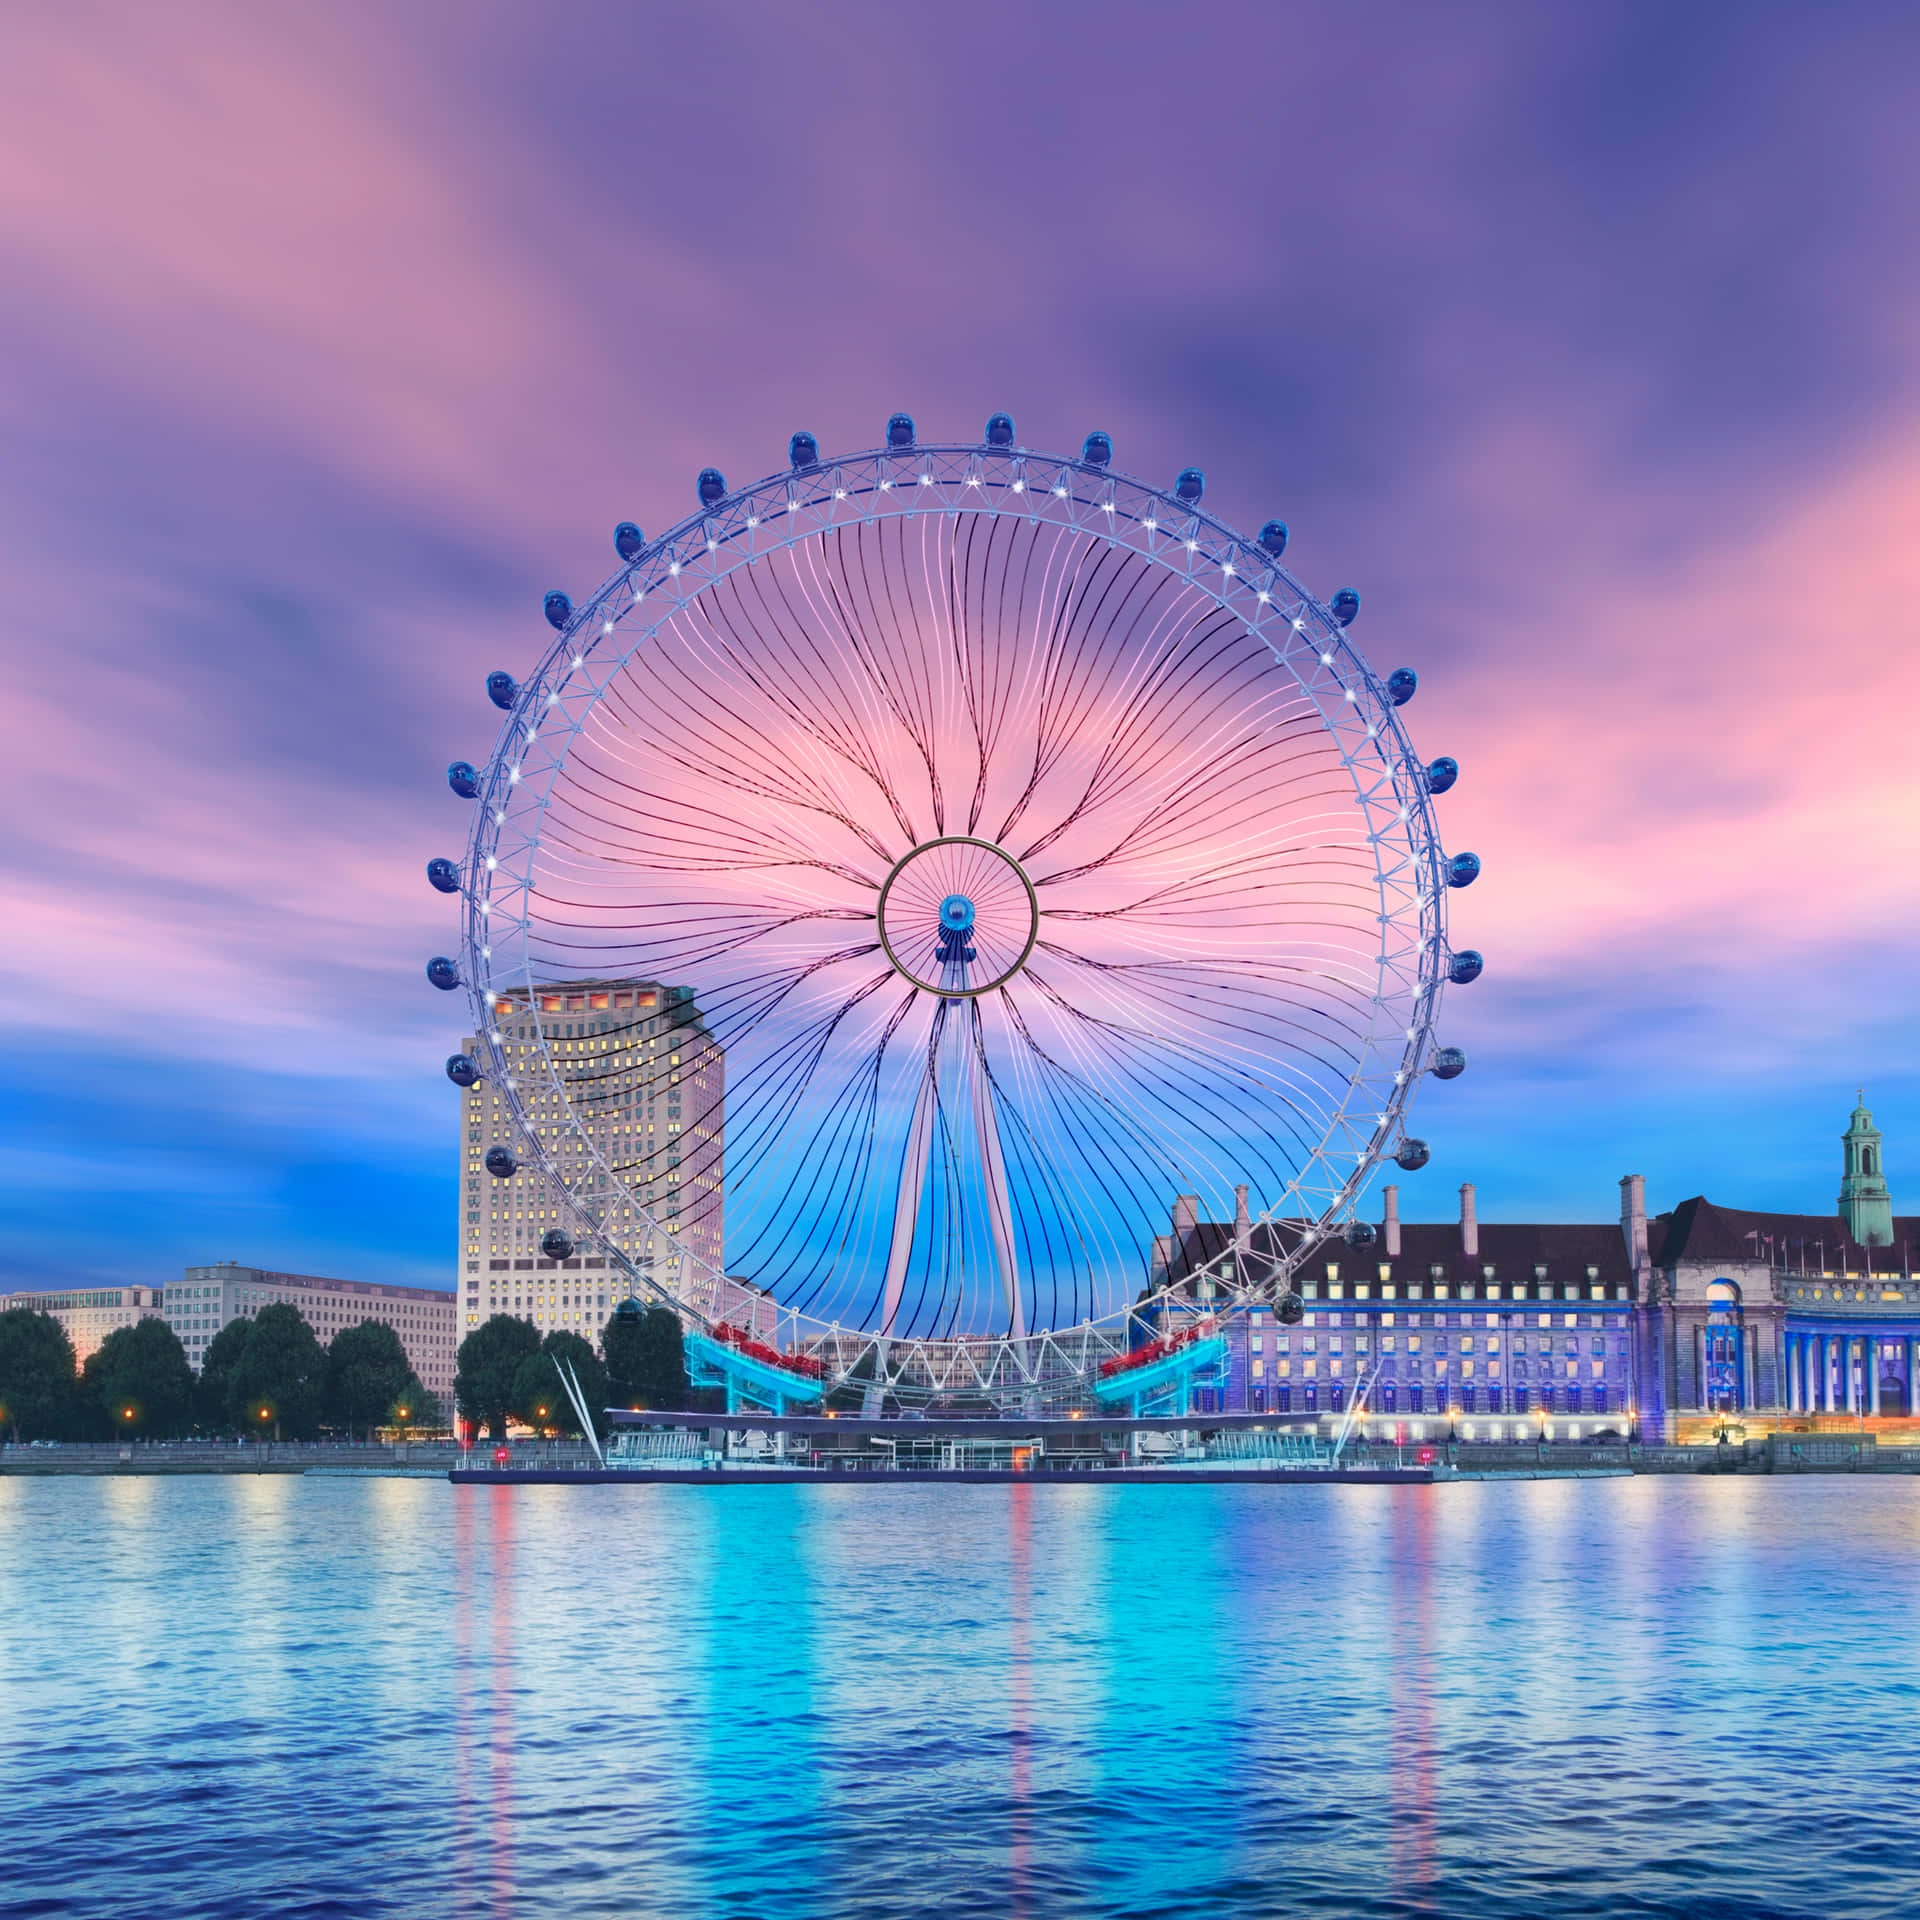 500 London Eye Pictures HD  Download Free Images on Unsplash